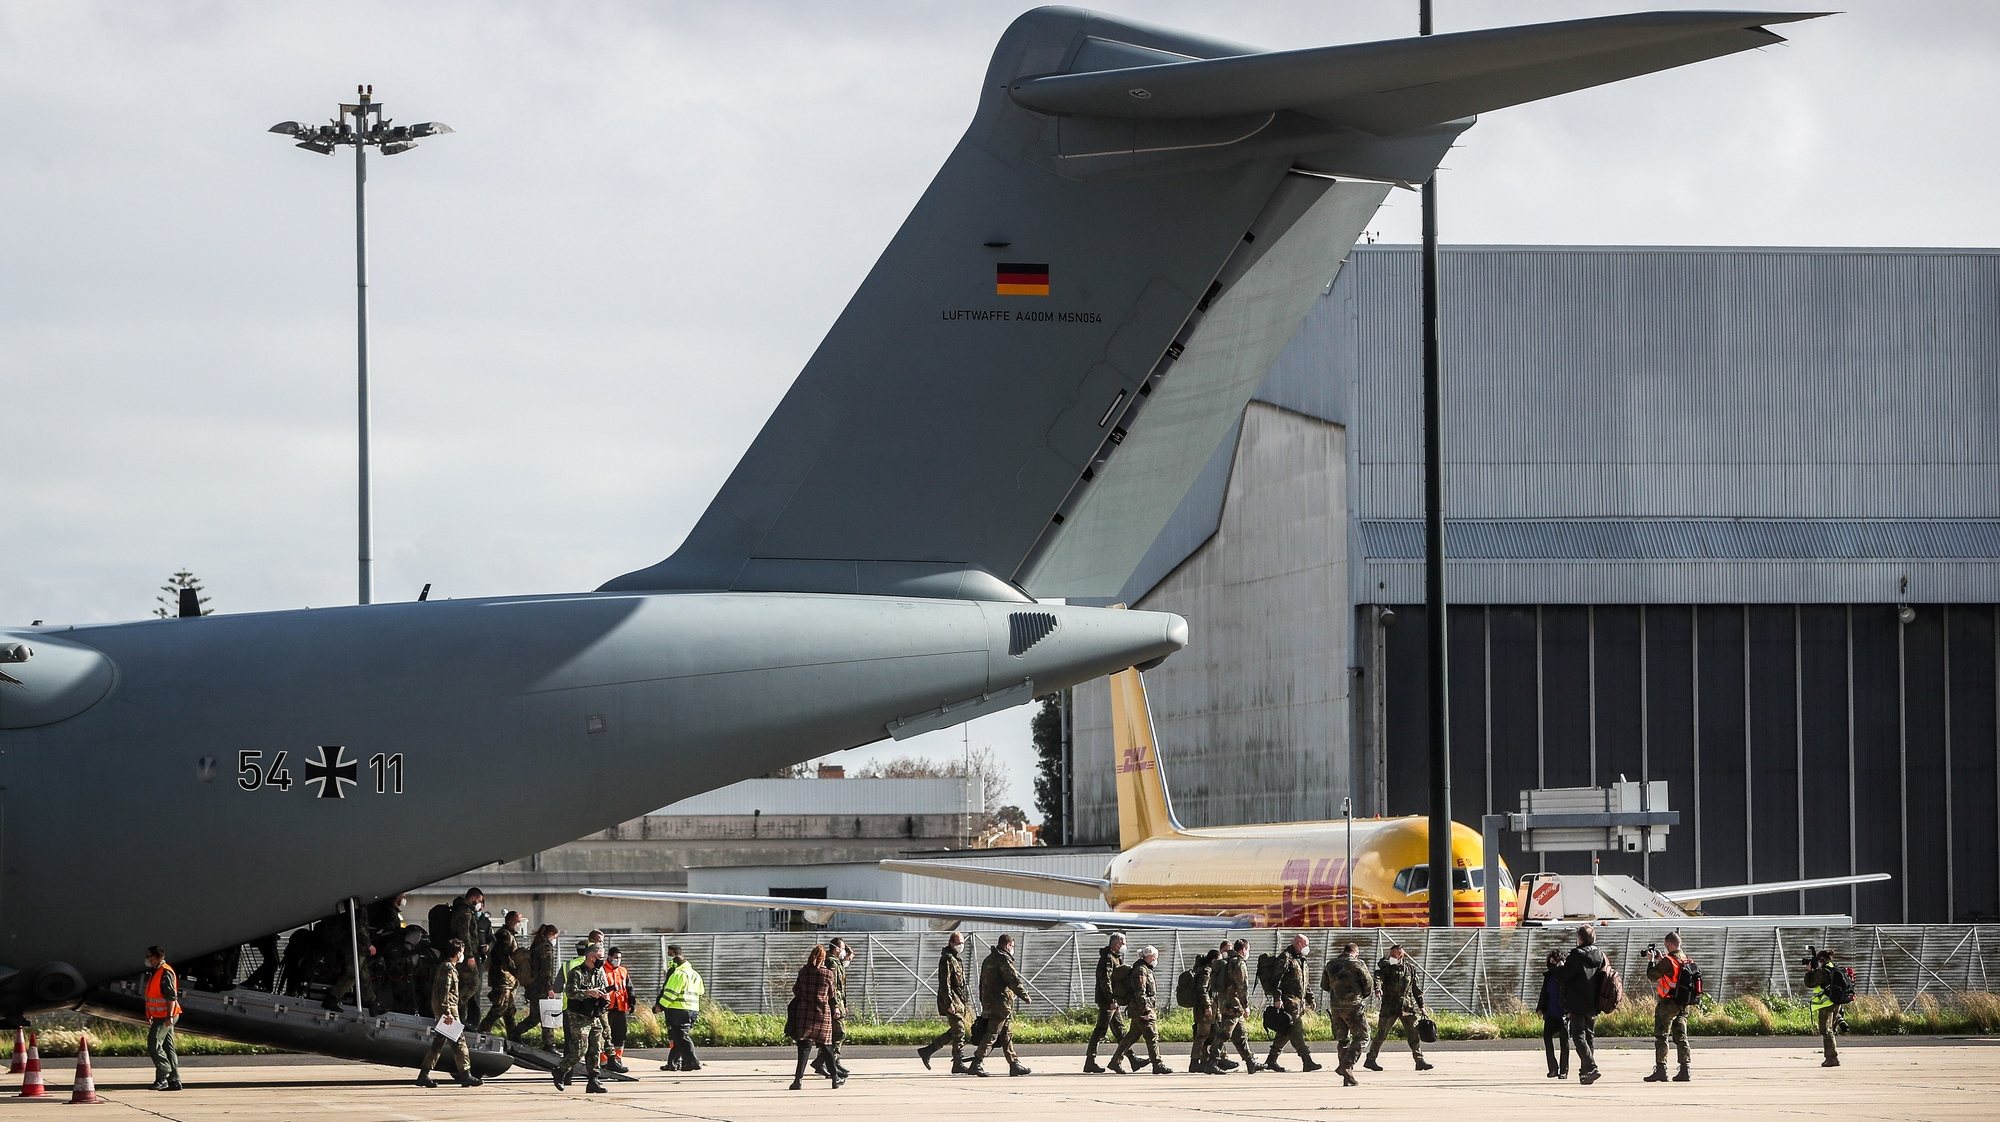 German military health professionals arrive at the airbase at Figo Maduro, in Lisbon, 03 February 2021. The German Armed Forces (Bundeswehr) decided to launch a relief mission against the coronavirus disease (covid-19) pandemic for Portugal within the framework of humanitarian emergency and disaster relief. For this purpose, an Airbus A400M of the German Air Force took off on the day for Lisbon Airport with a medical aid team and numerous medical equipment and medical products.  MARIO CRUZ/LUSA